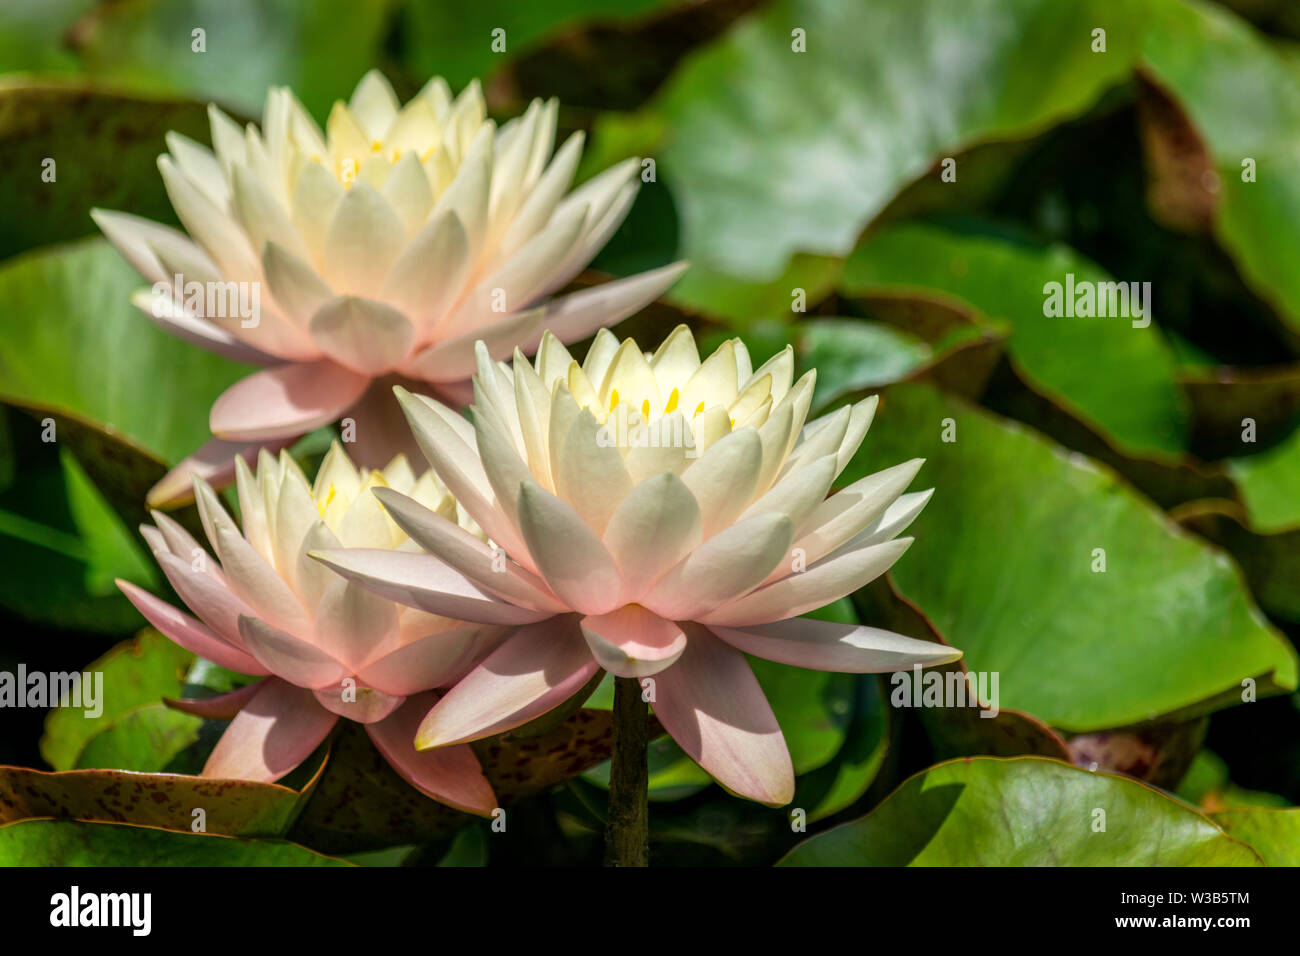 Beautiful soft pink and cream water lily flowers in full bloom surrounded by lily pad leaves in the full sun Stock Photo